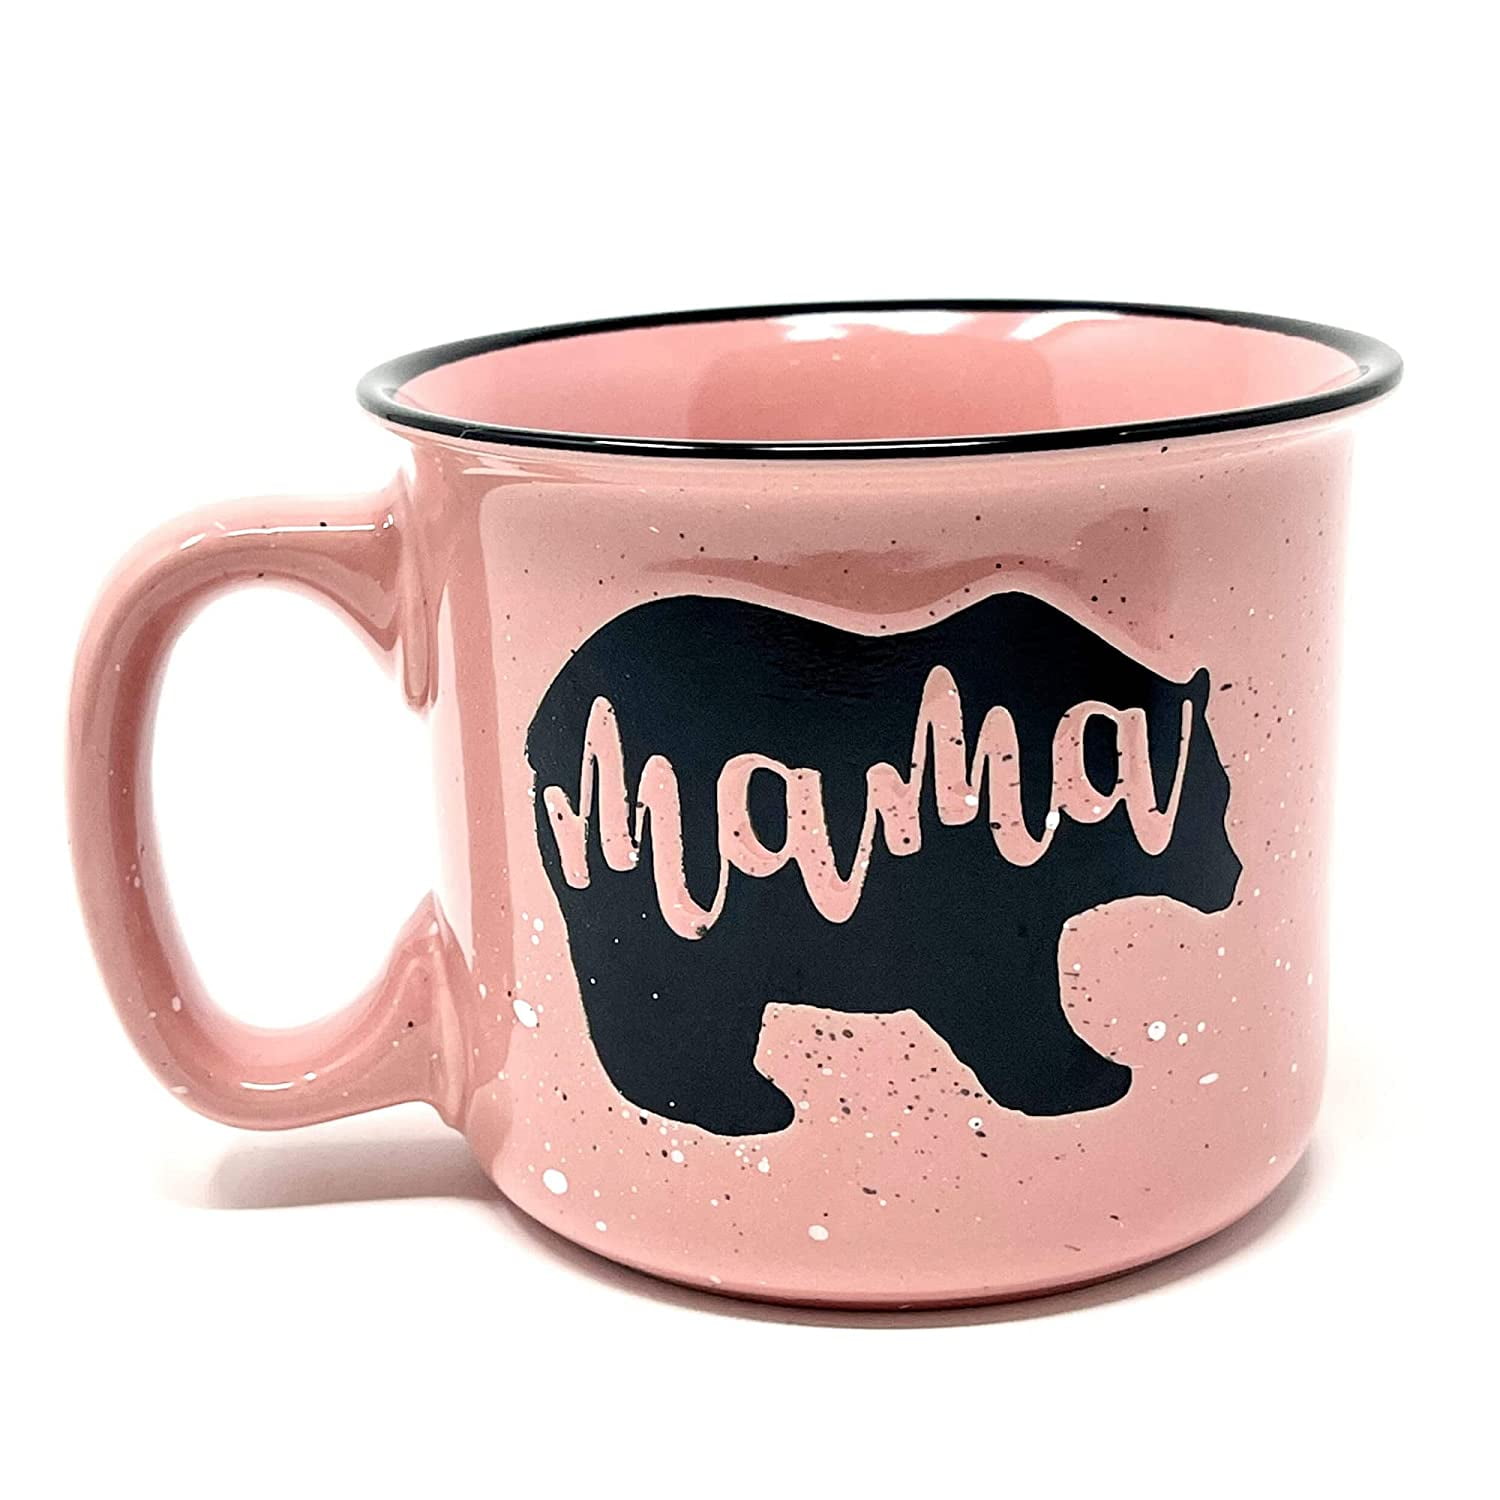 Mama Bear Coffee Mug for Mom, Mother, Wife - Cute Coffee Cups for Women -  Unique Fun Gifts for Her, Mother's Day, Christmas (Coral) 